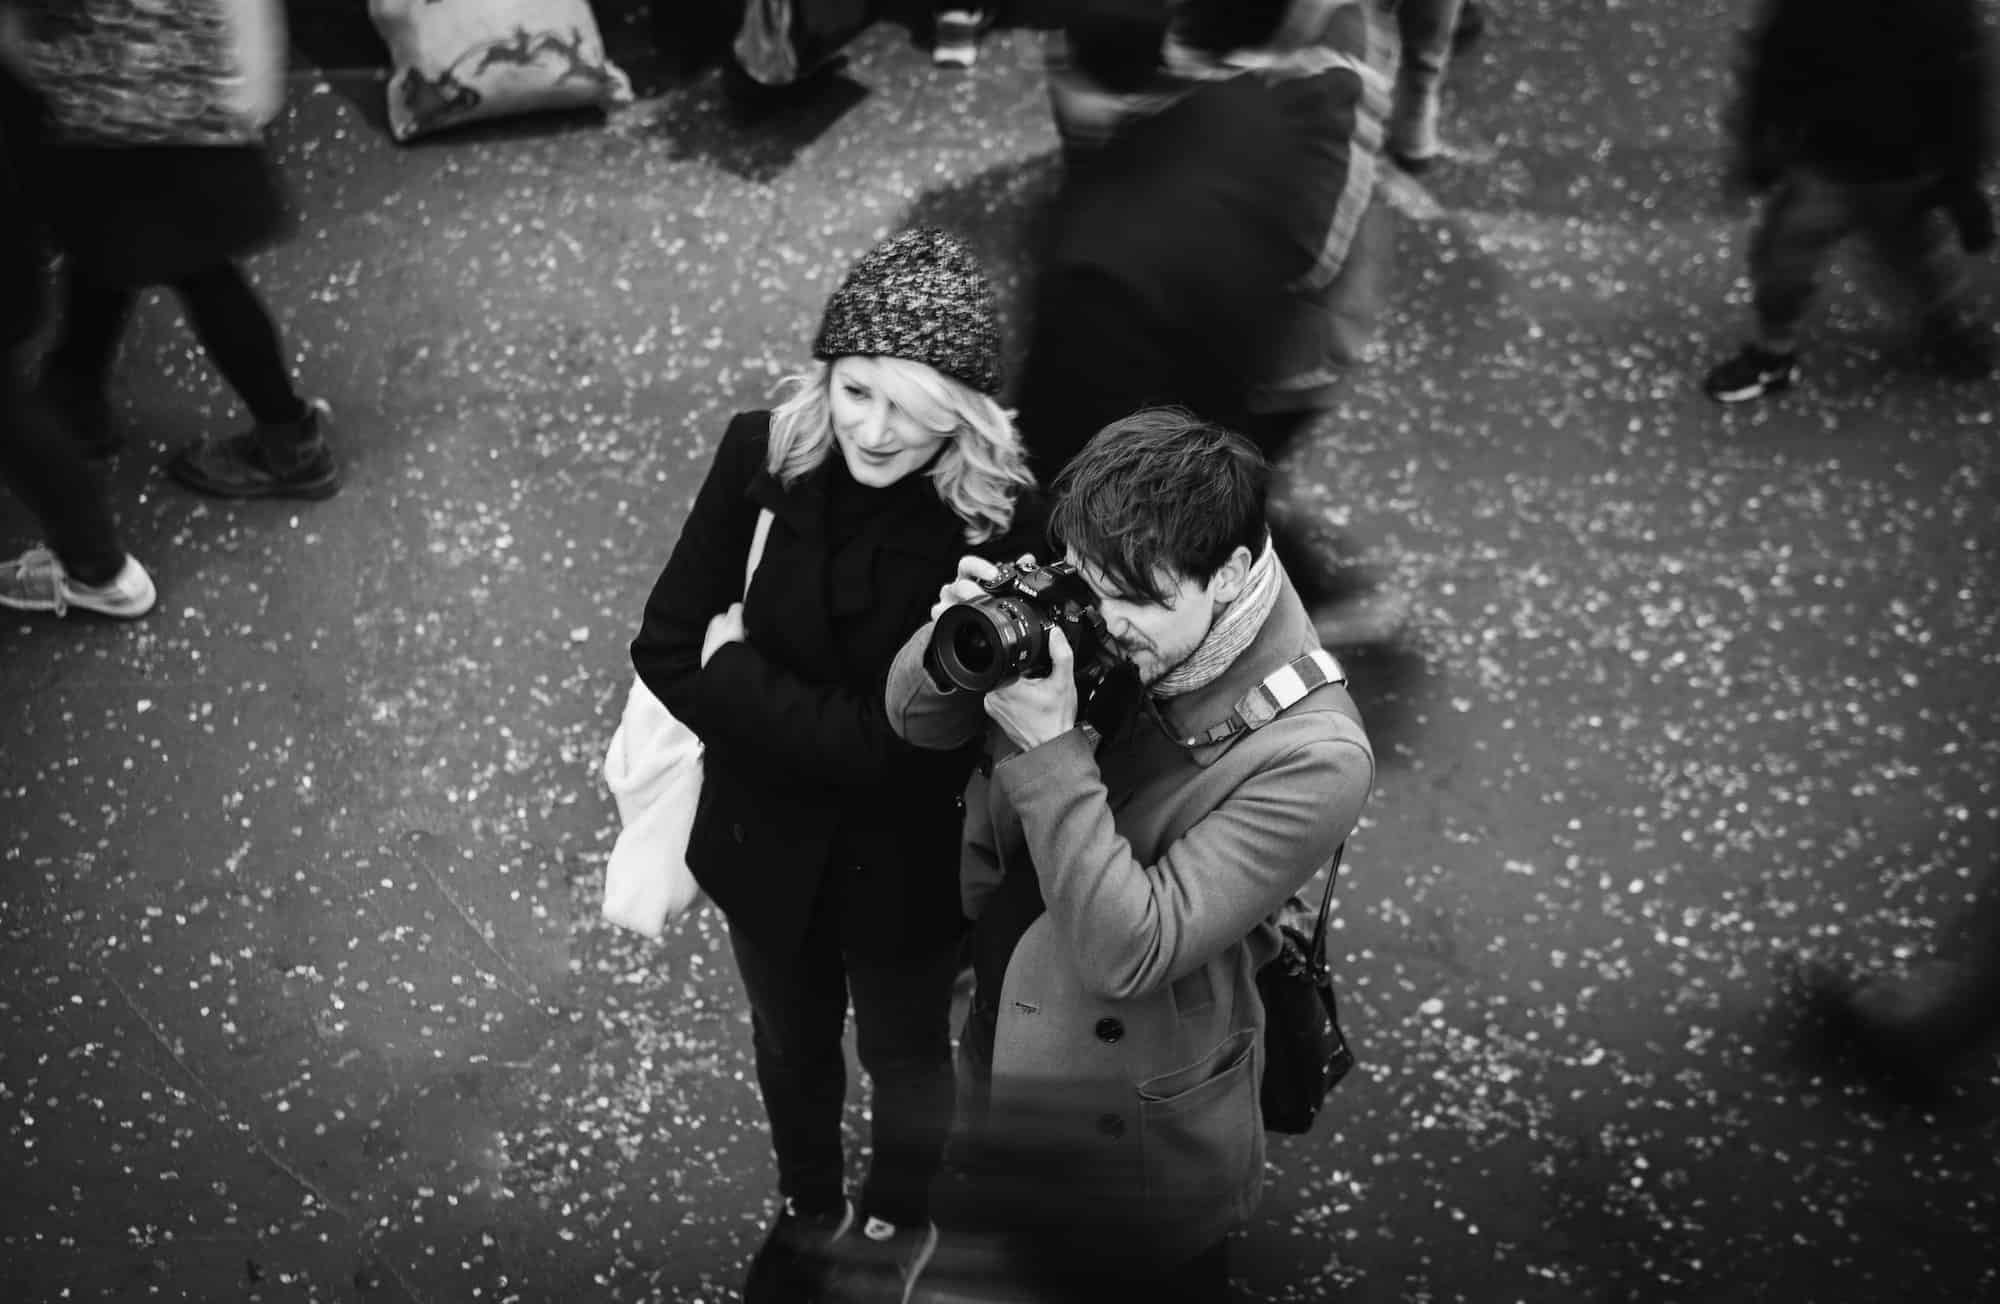 Send us your Paris stories and photos, like this couple in crowd, taking pictures.